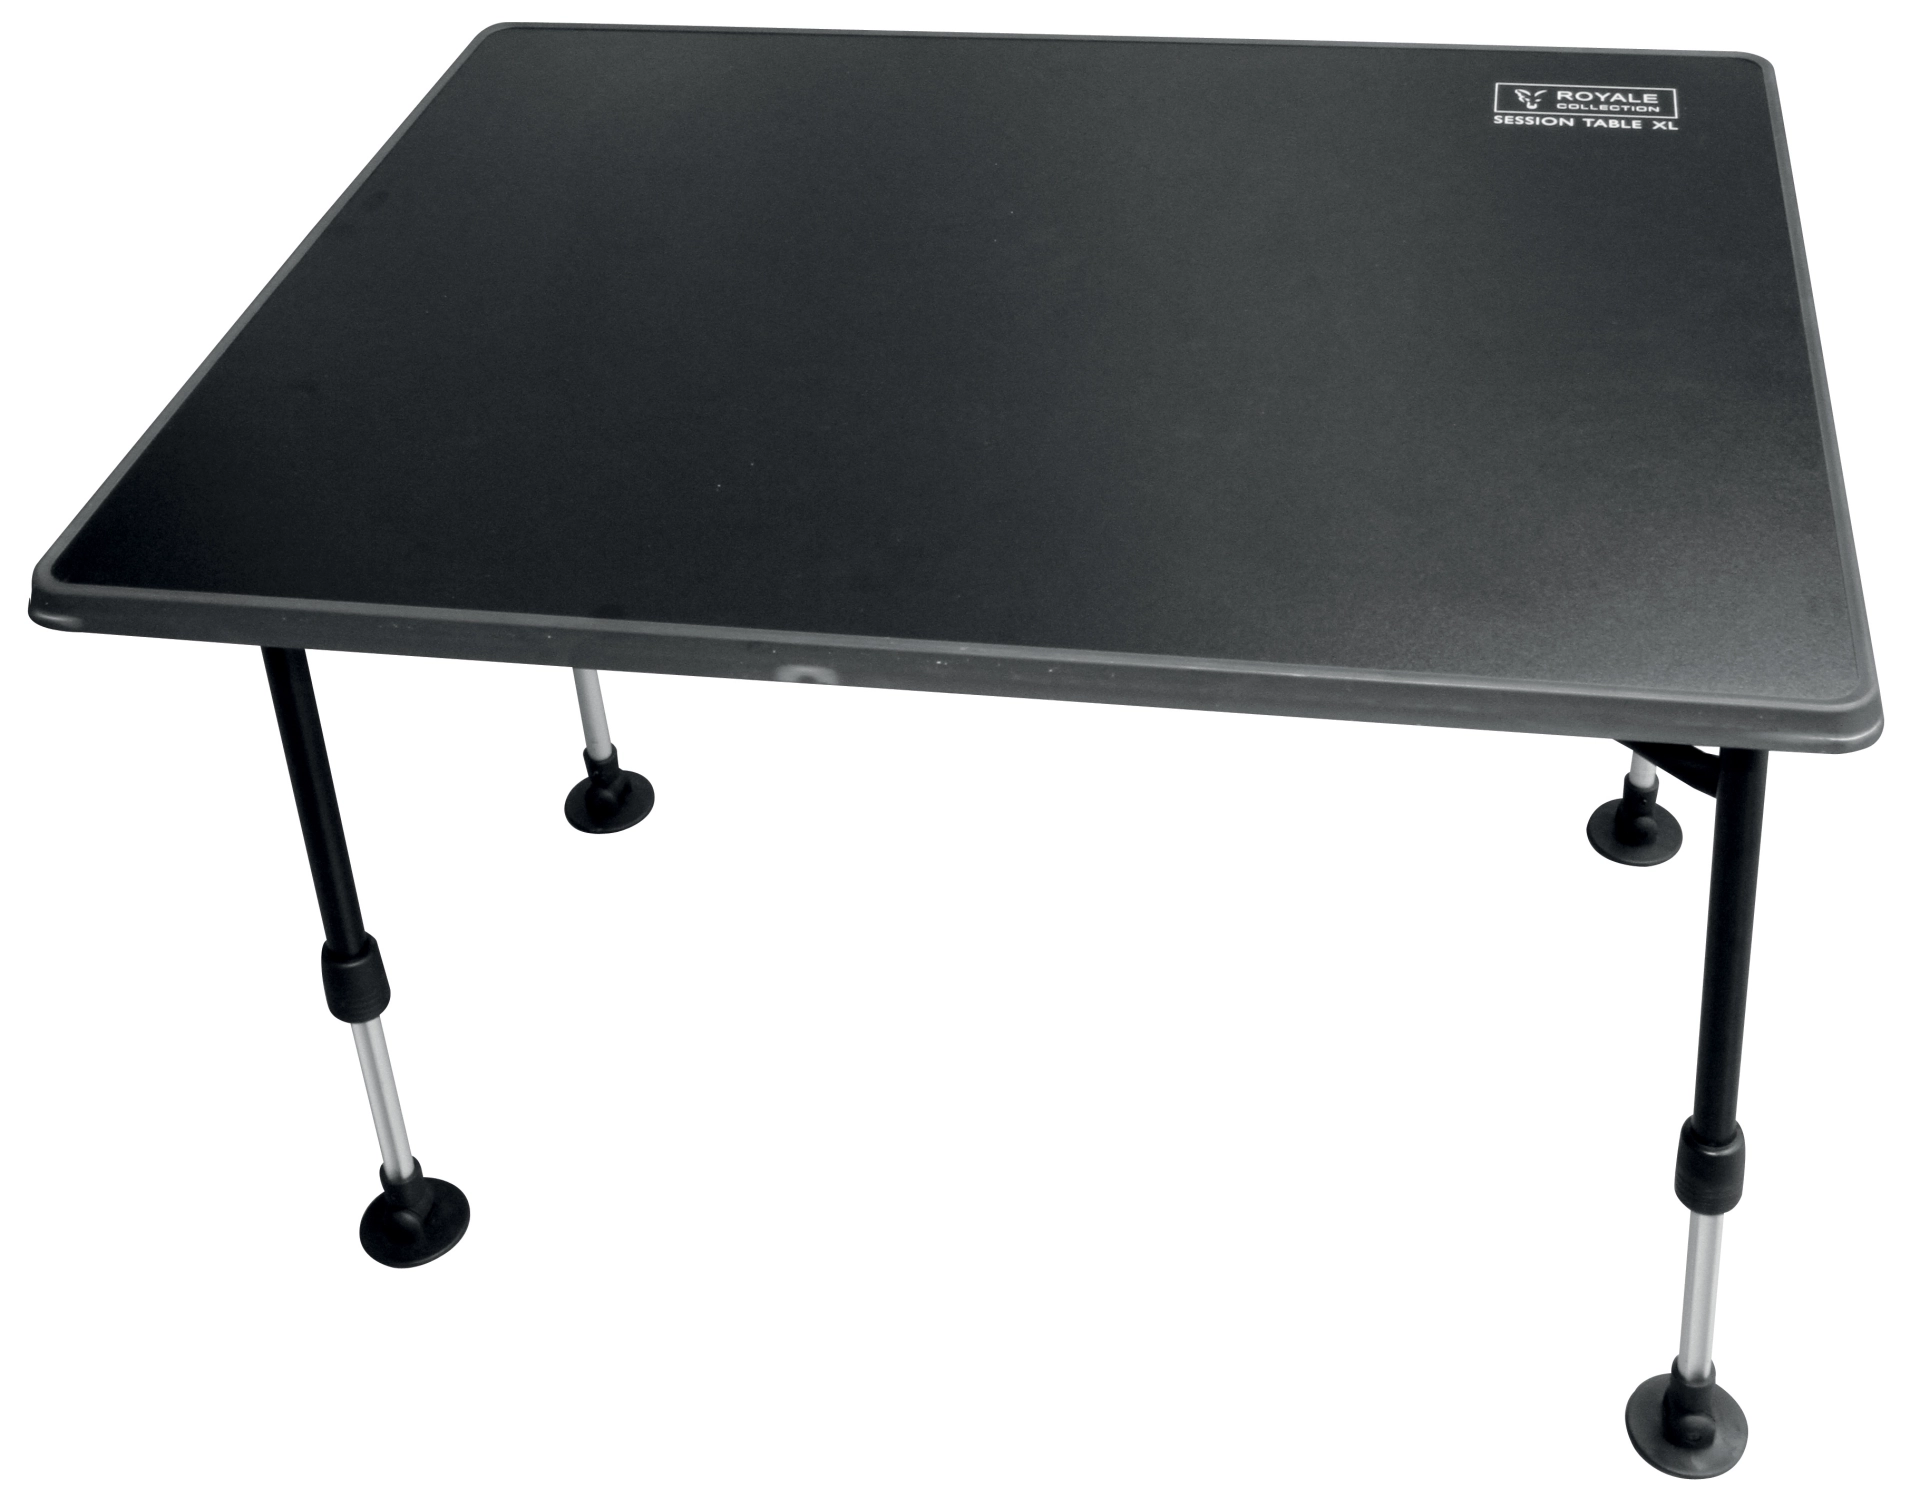 FOX Royale Session Table XL